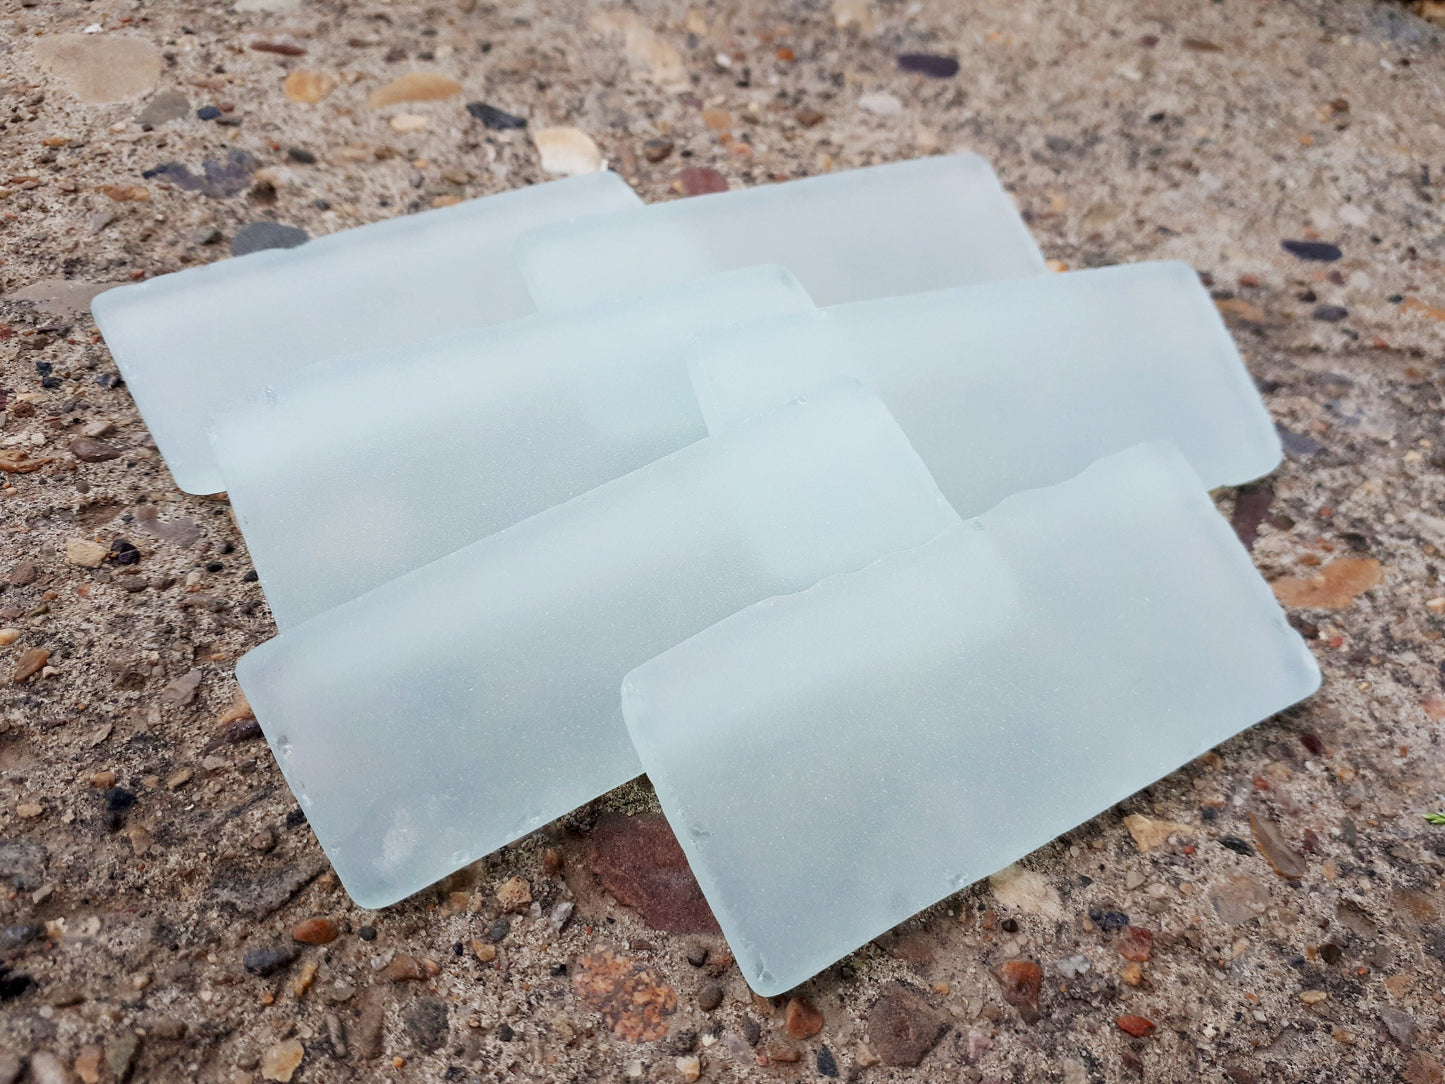 Light Sea Green Sea Glass Place Cards - Set of 20 Tumbled Glass Tiles